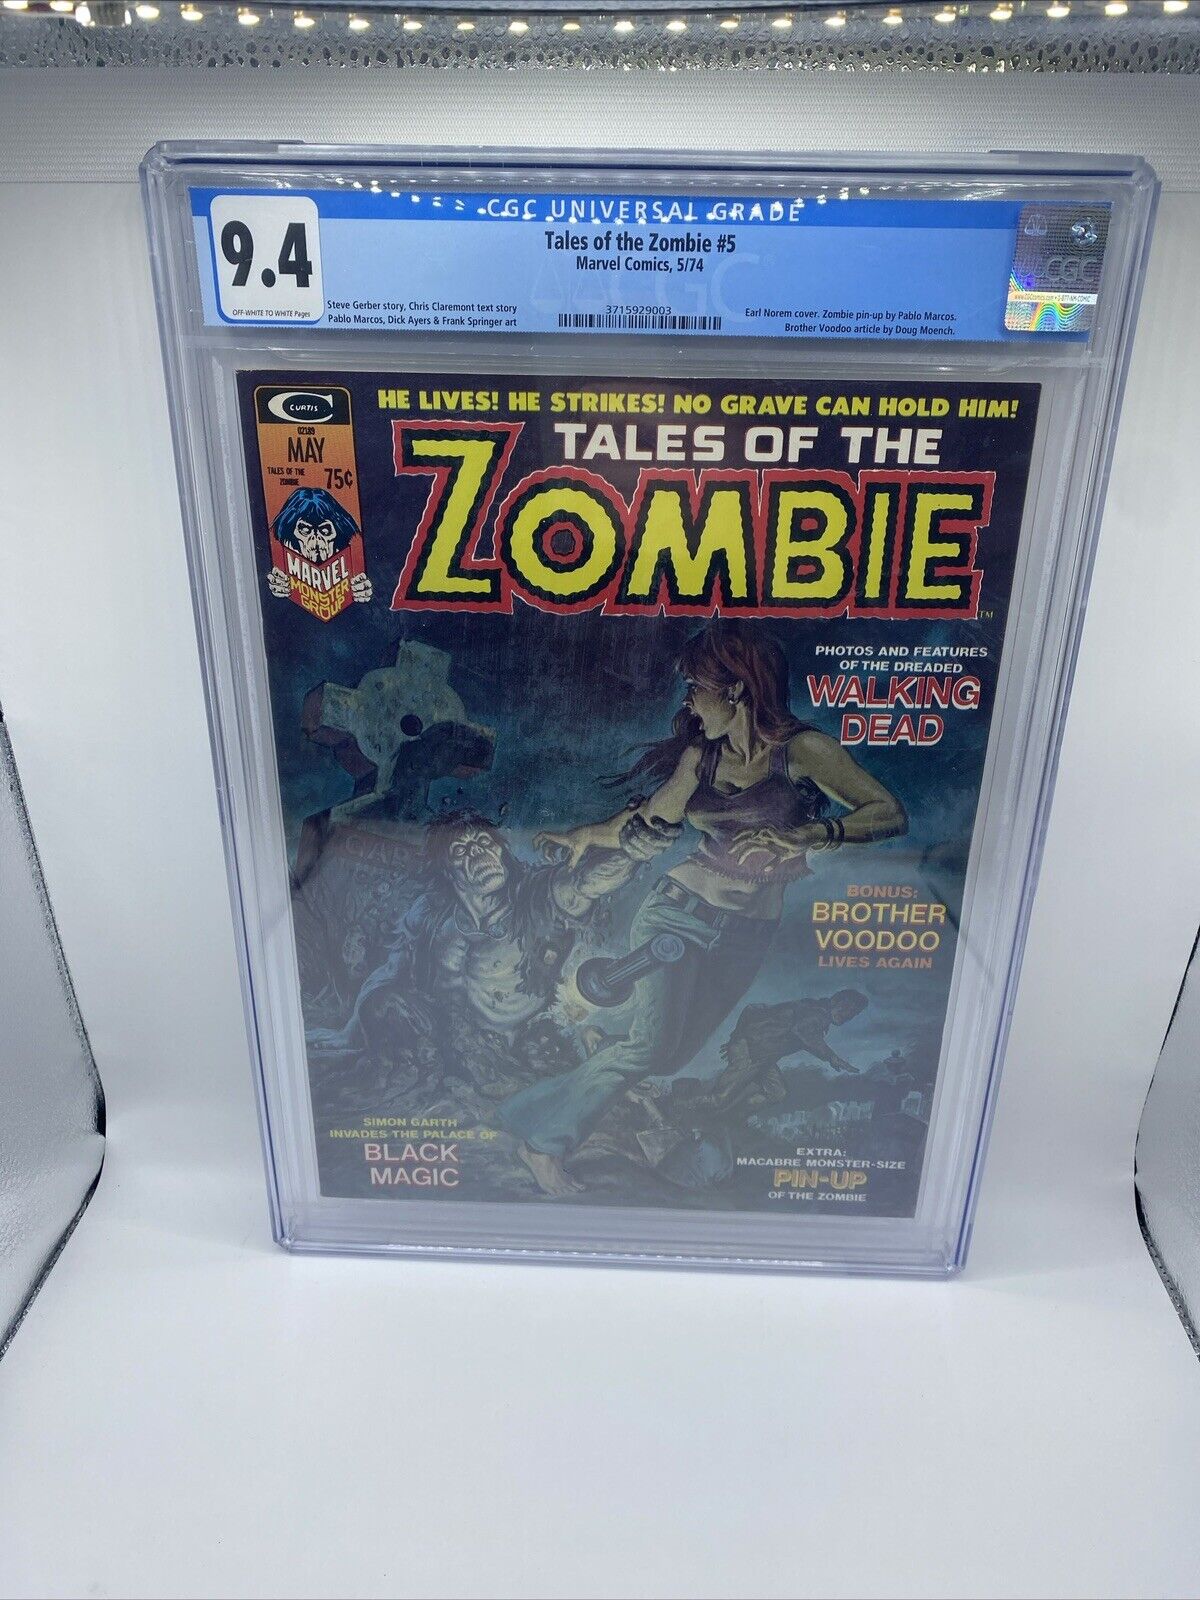 Takes Of The Zombie #5 CGC 9.4